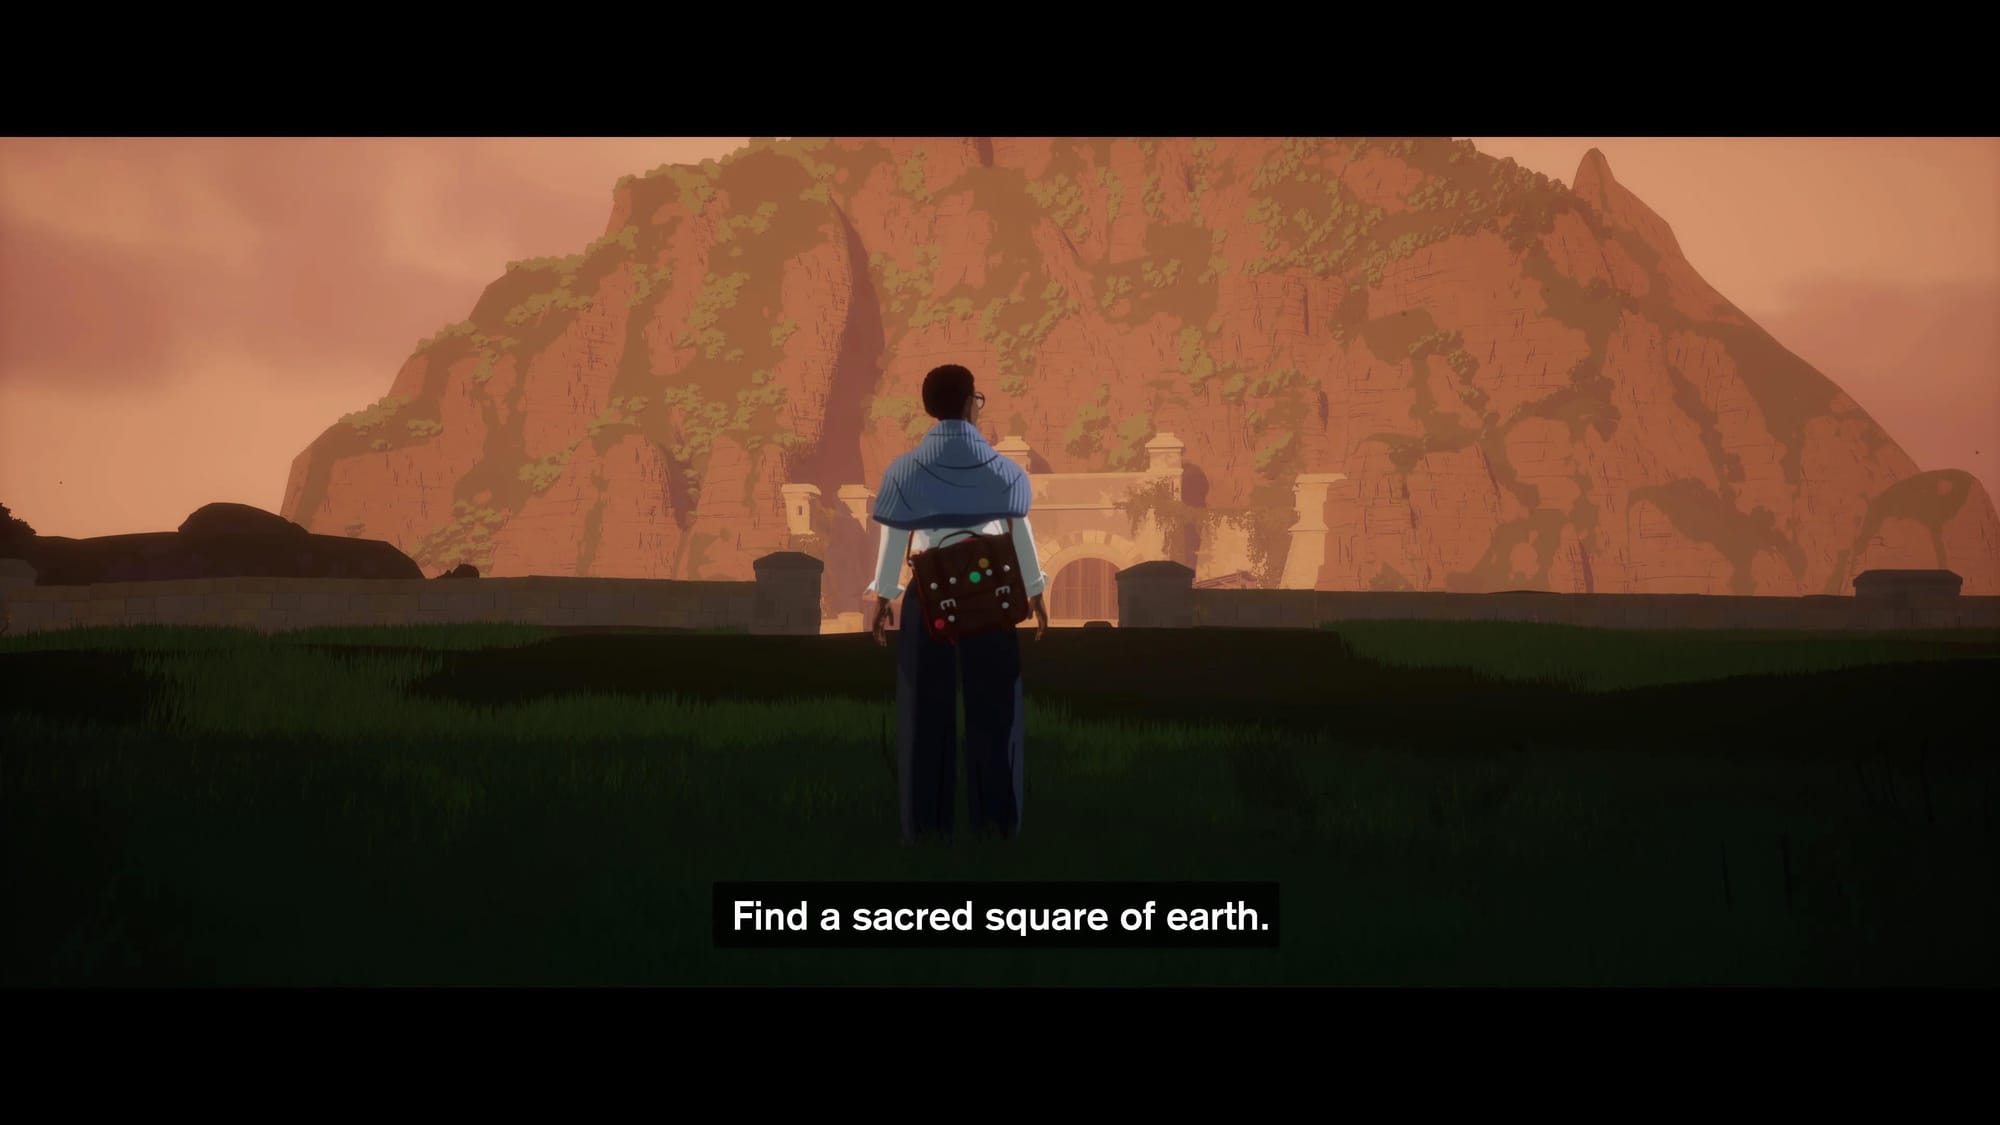 A screenshot of the cinematic part of the game with the main character in the center and a mountain on the background. Subtitles say "Find a sacred square of earth".